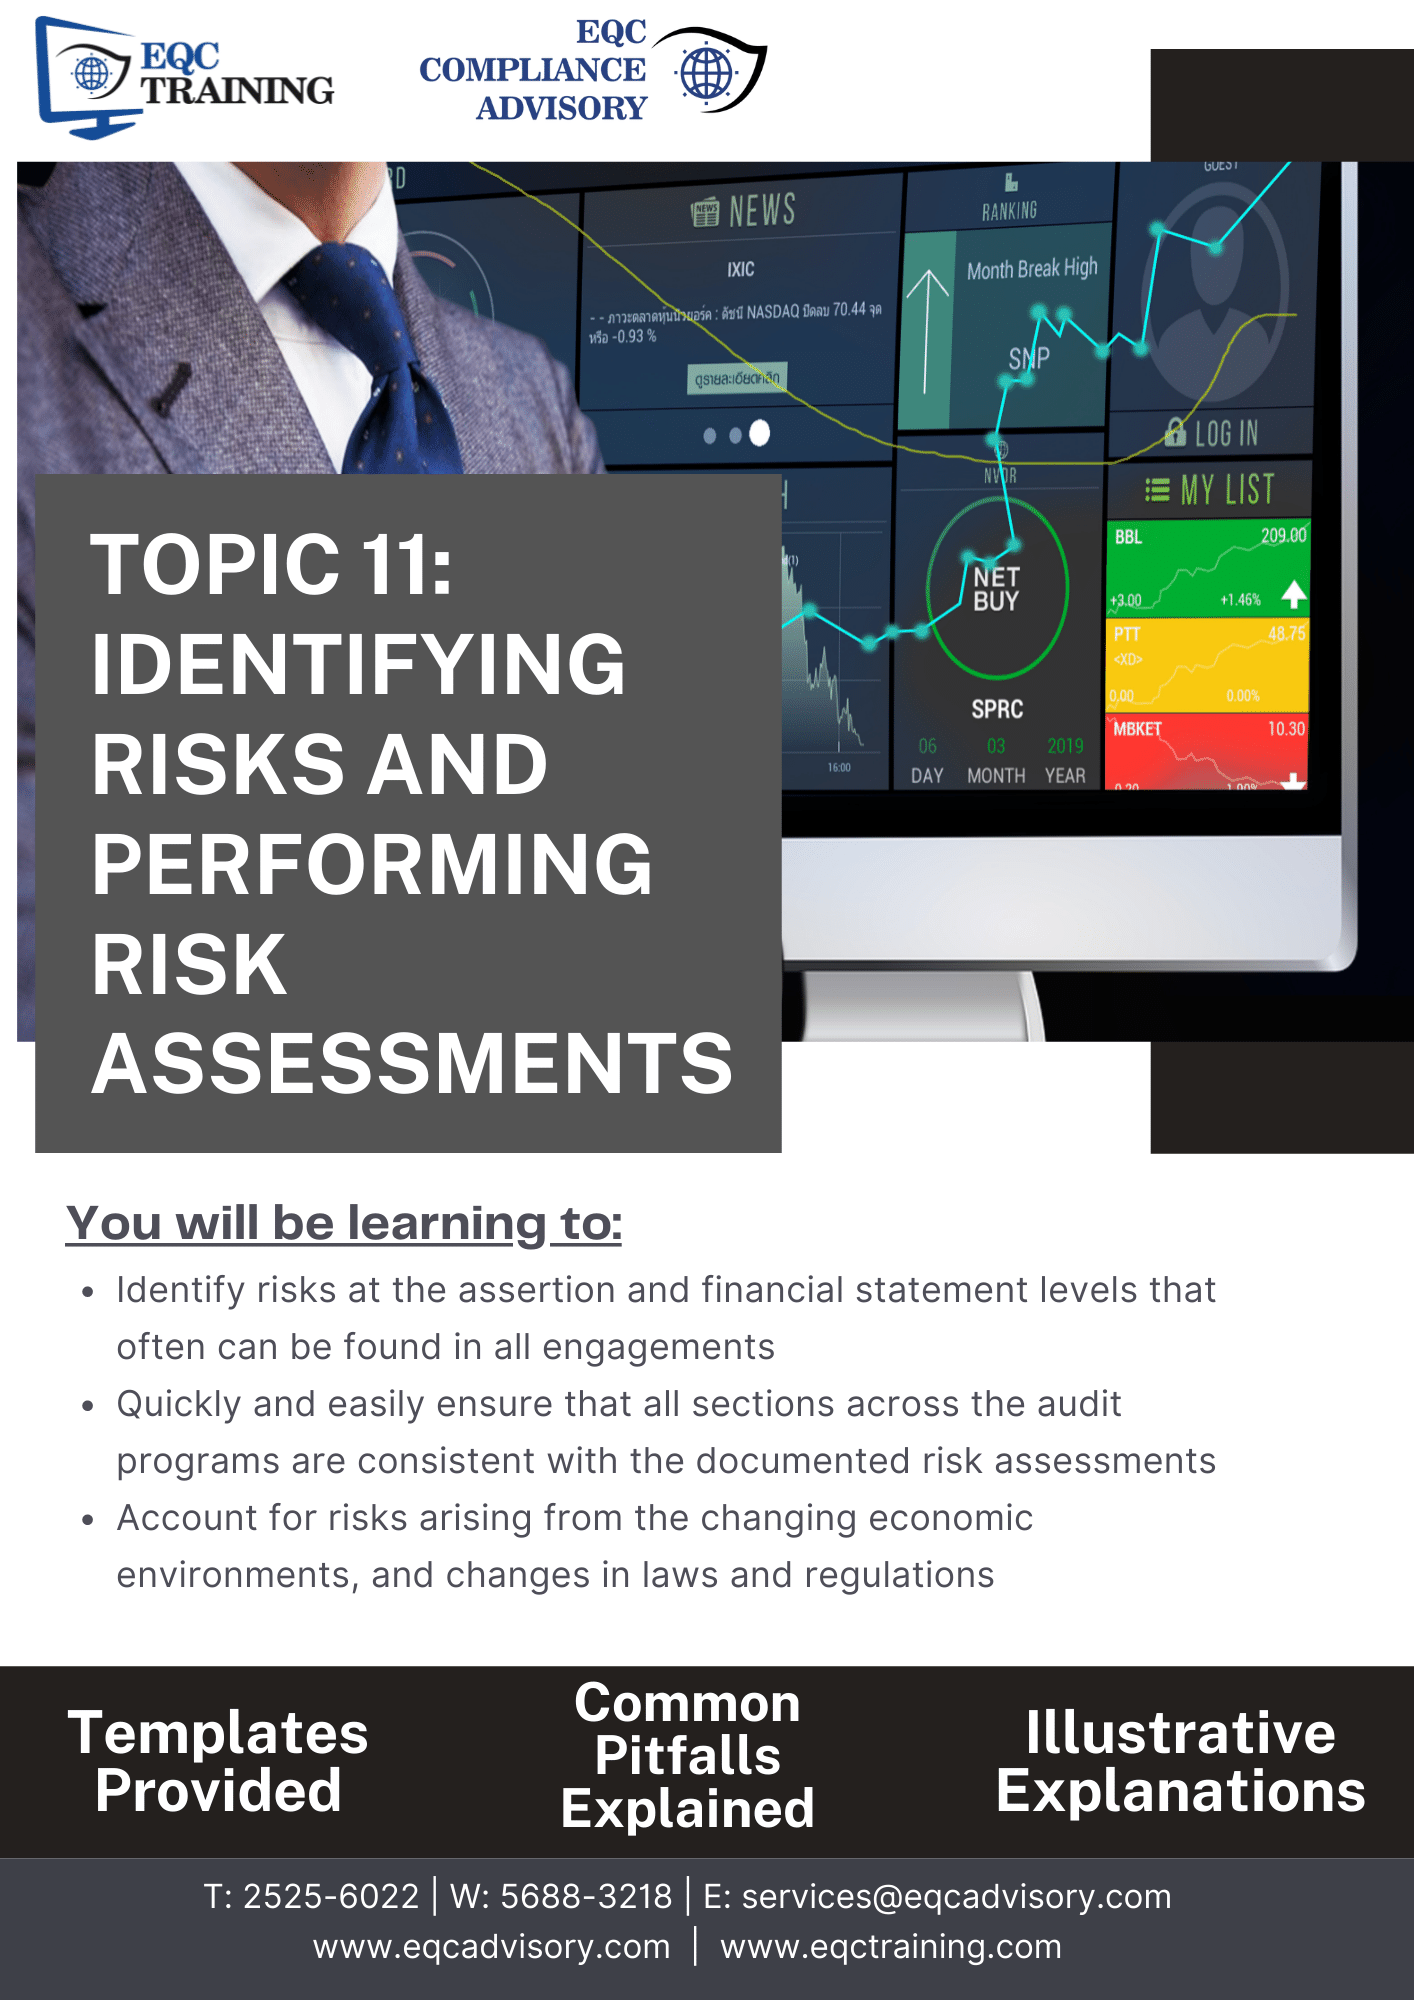 011 Identifying Risks and Performing Risk Assessments